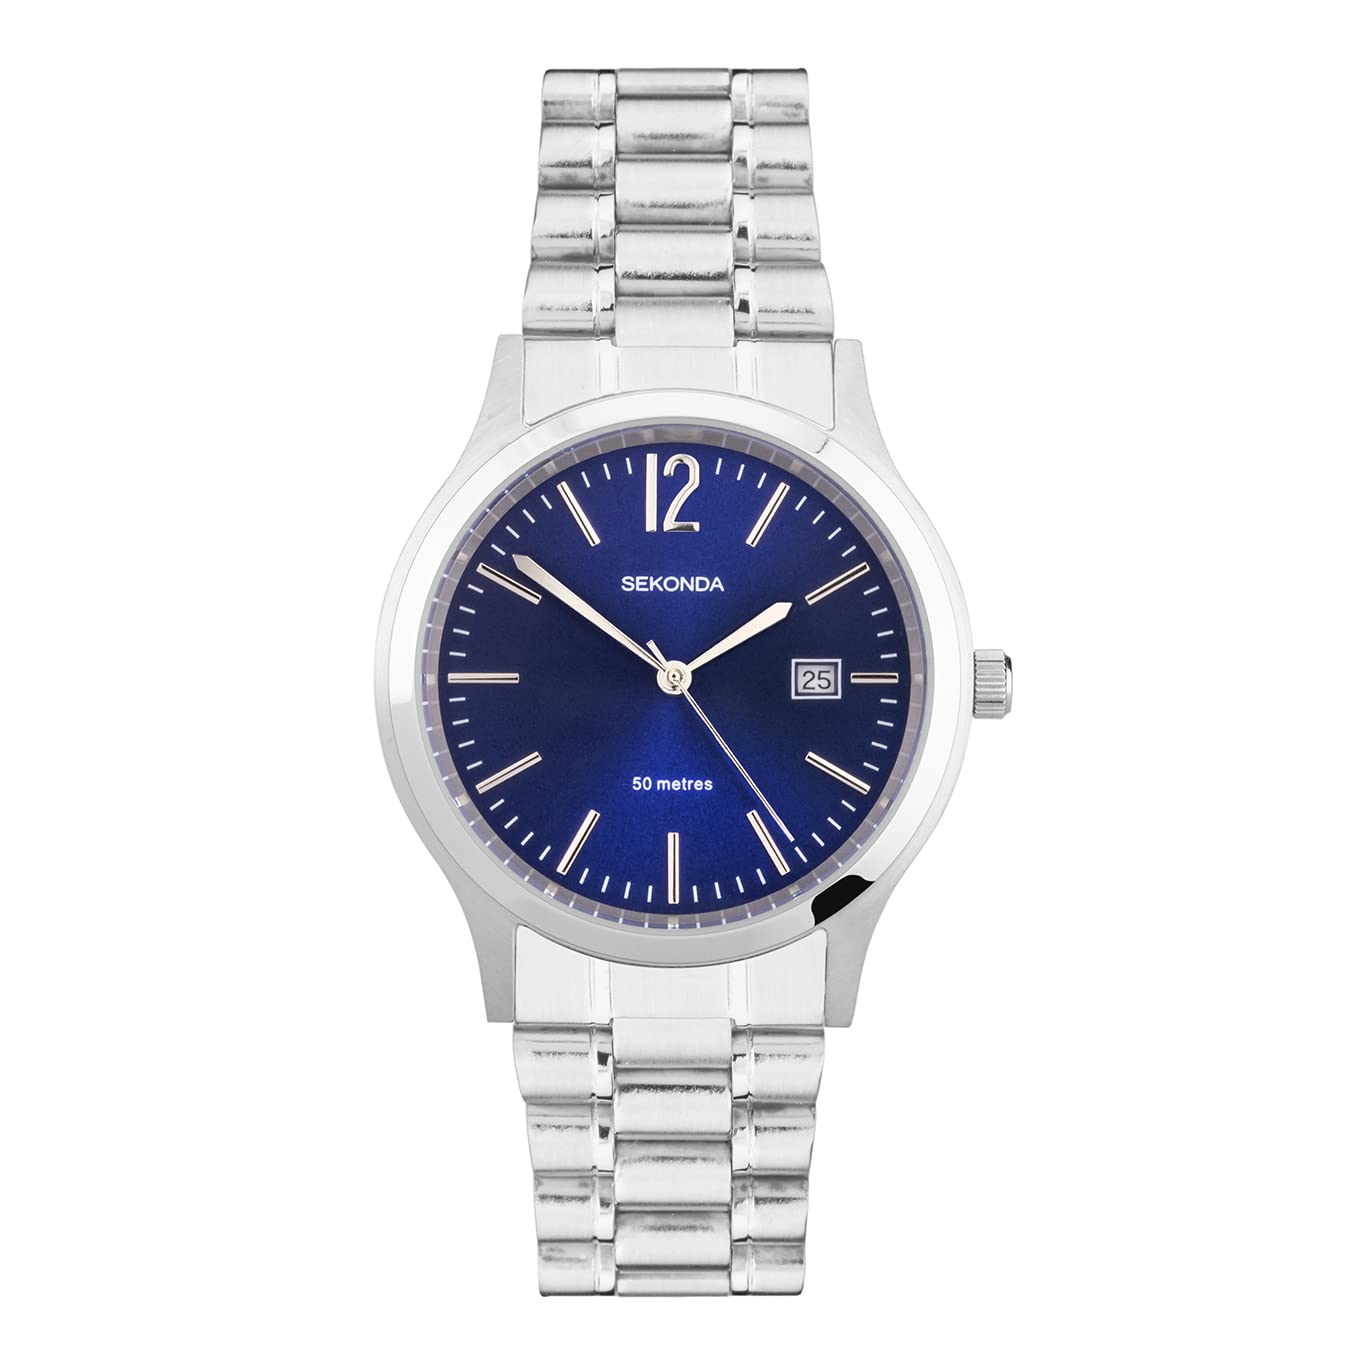 Sekonda Men's Quartz Watch with Blue Dial Analogue Display and Silver Stainless Steel Bracelet 3728.71